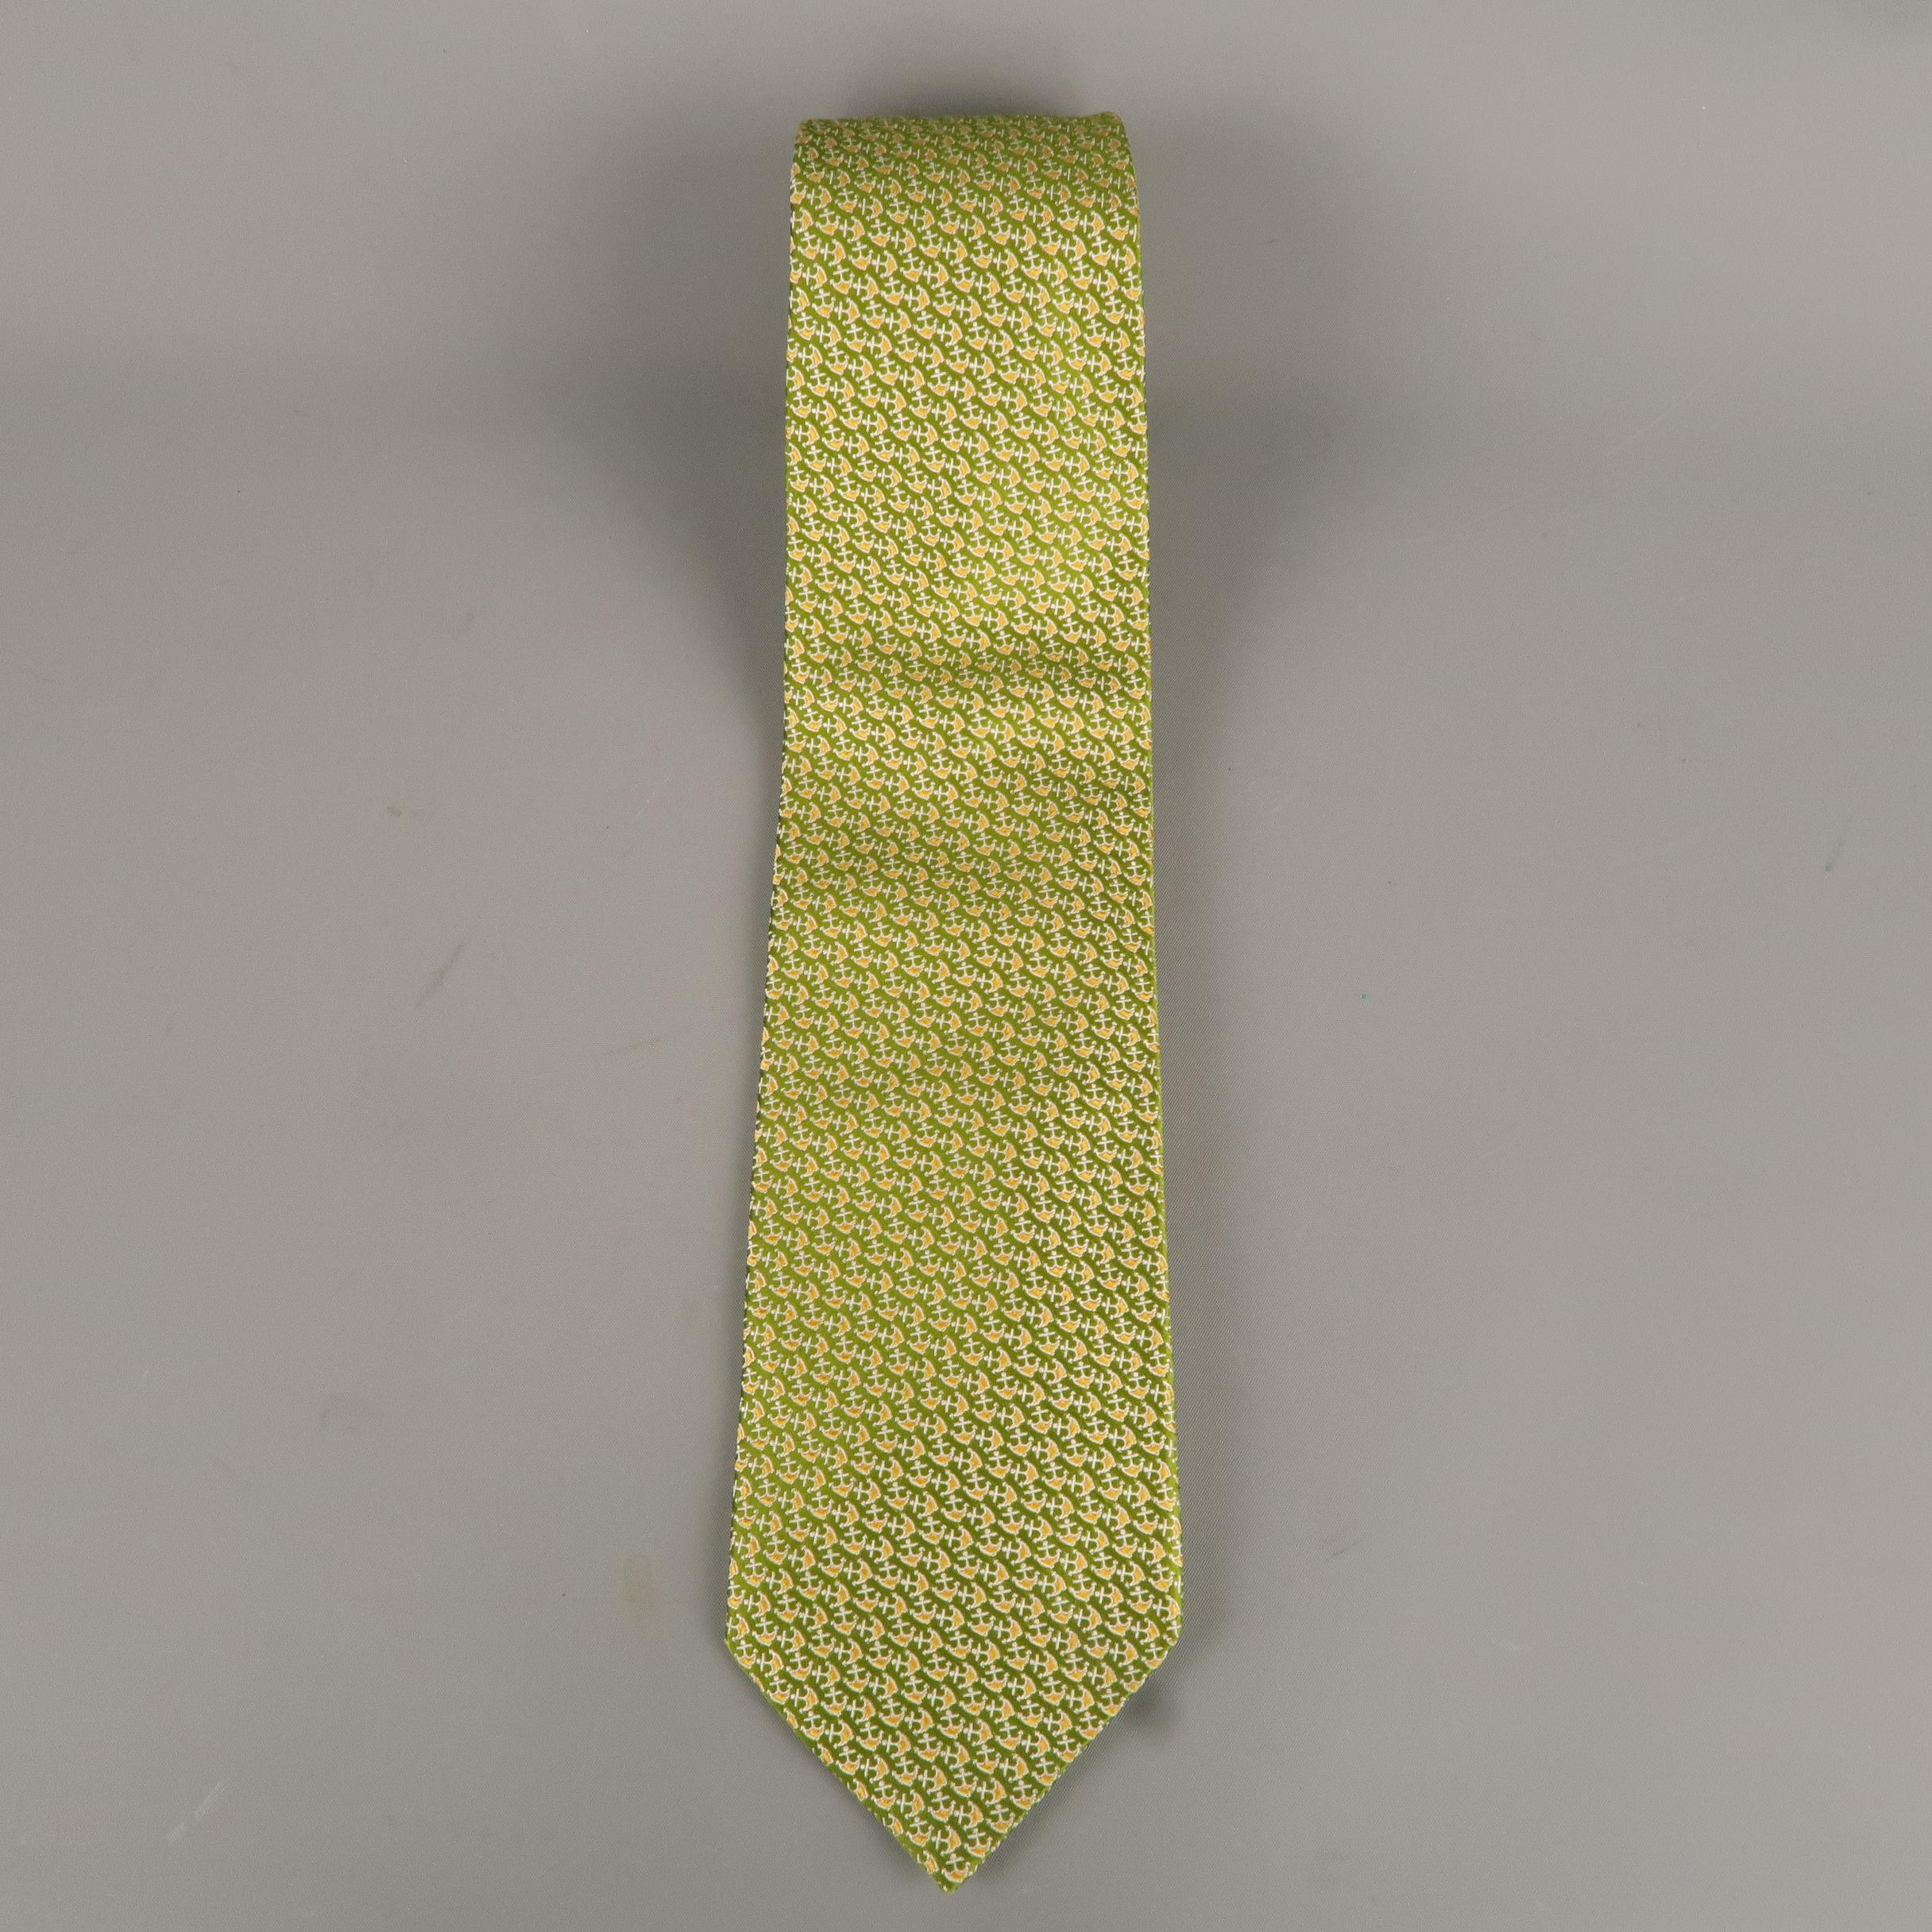 SALVATORE FERRAGAMO tie comes in green metallic silk with all over gold anchor print. Made in Italy.
 
Excellent Pre-Owned Condition.
 
Width: 3.85 in.